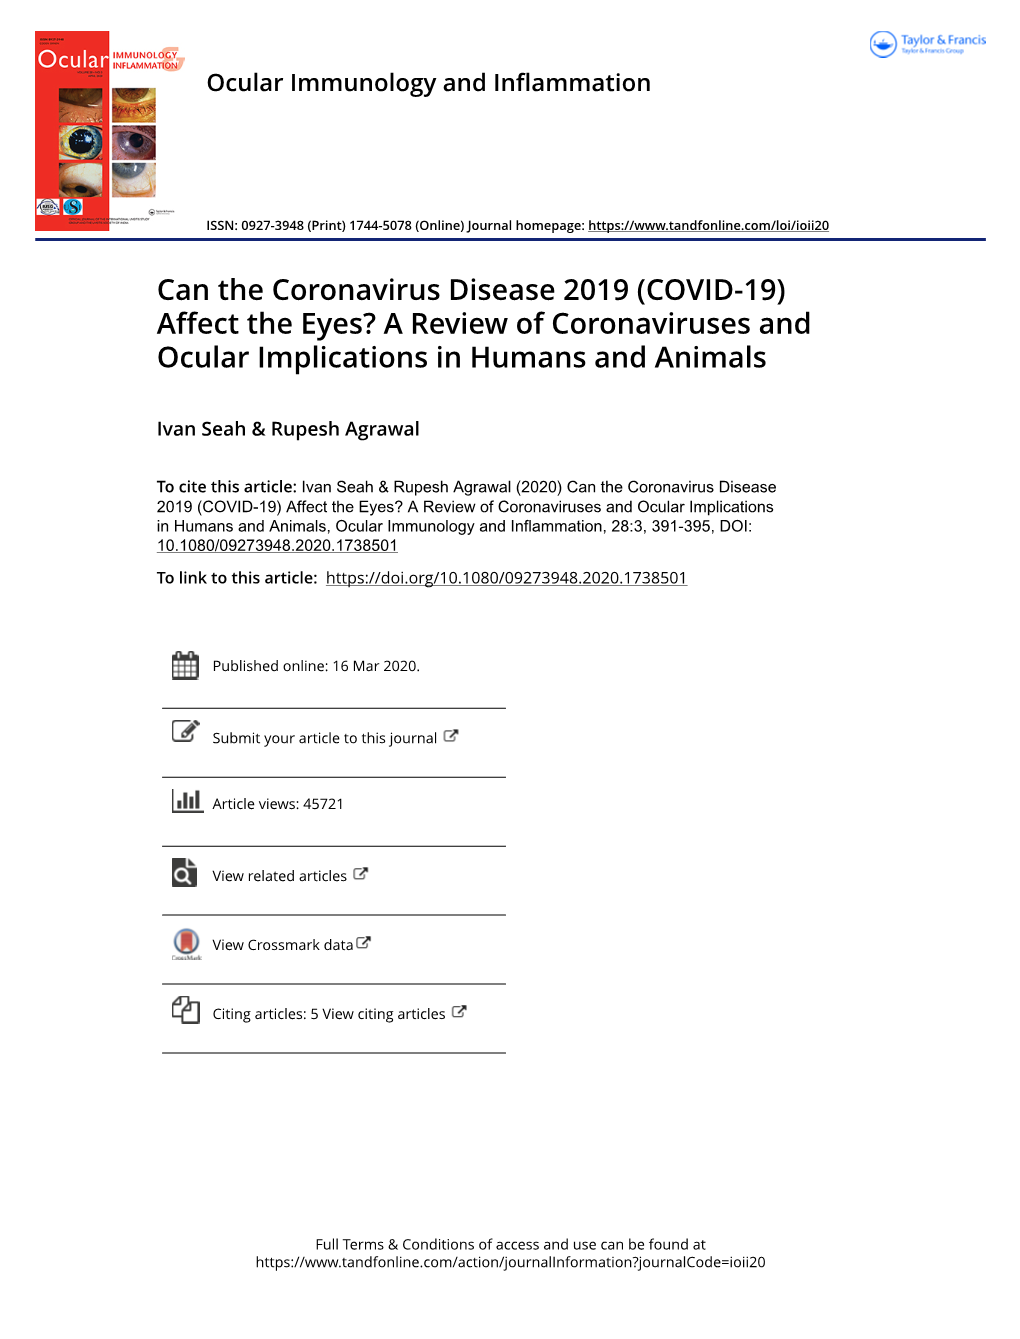 Can the Coronavirus Disease 2019 (COVID-19) Affect the Eyes? a Review of Coronaviruses and Ocular Implications in Humans and Animals